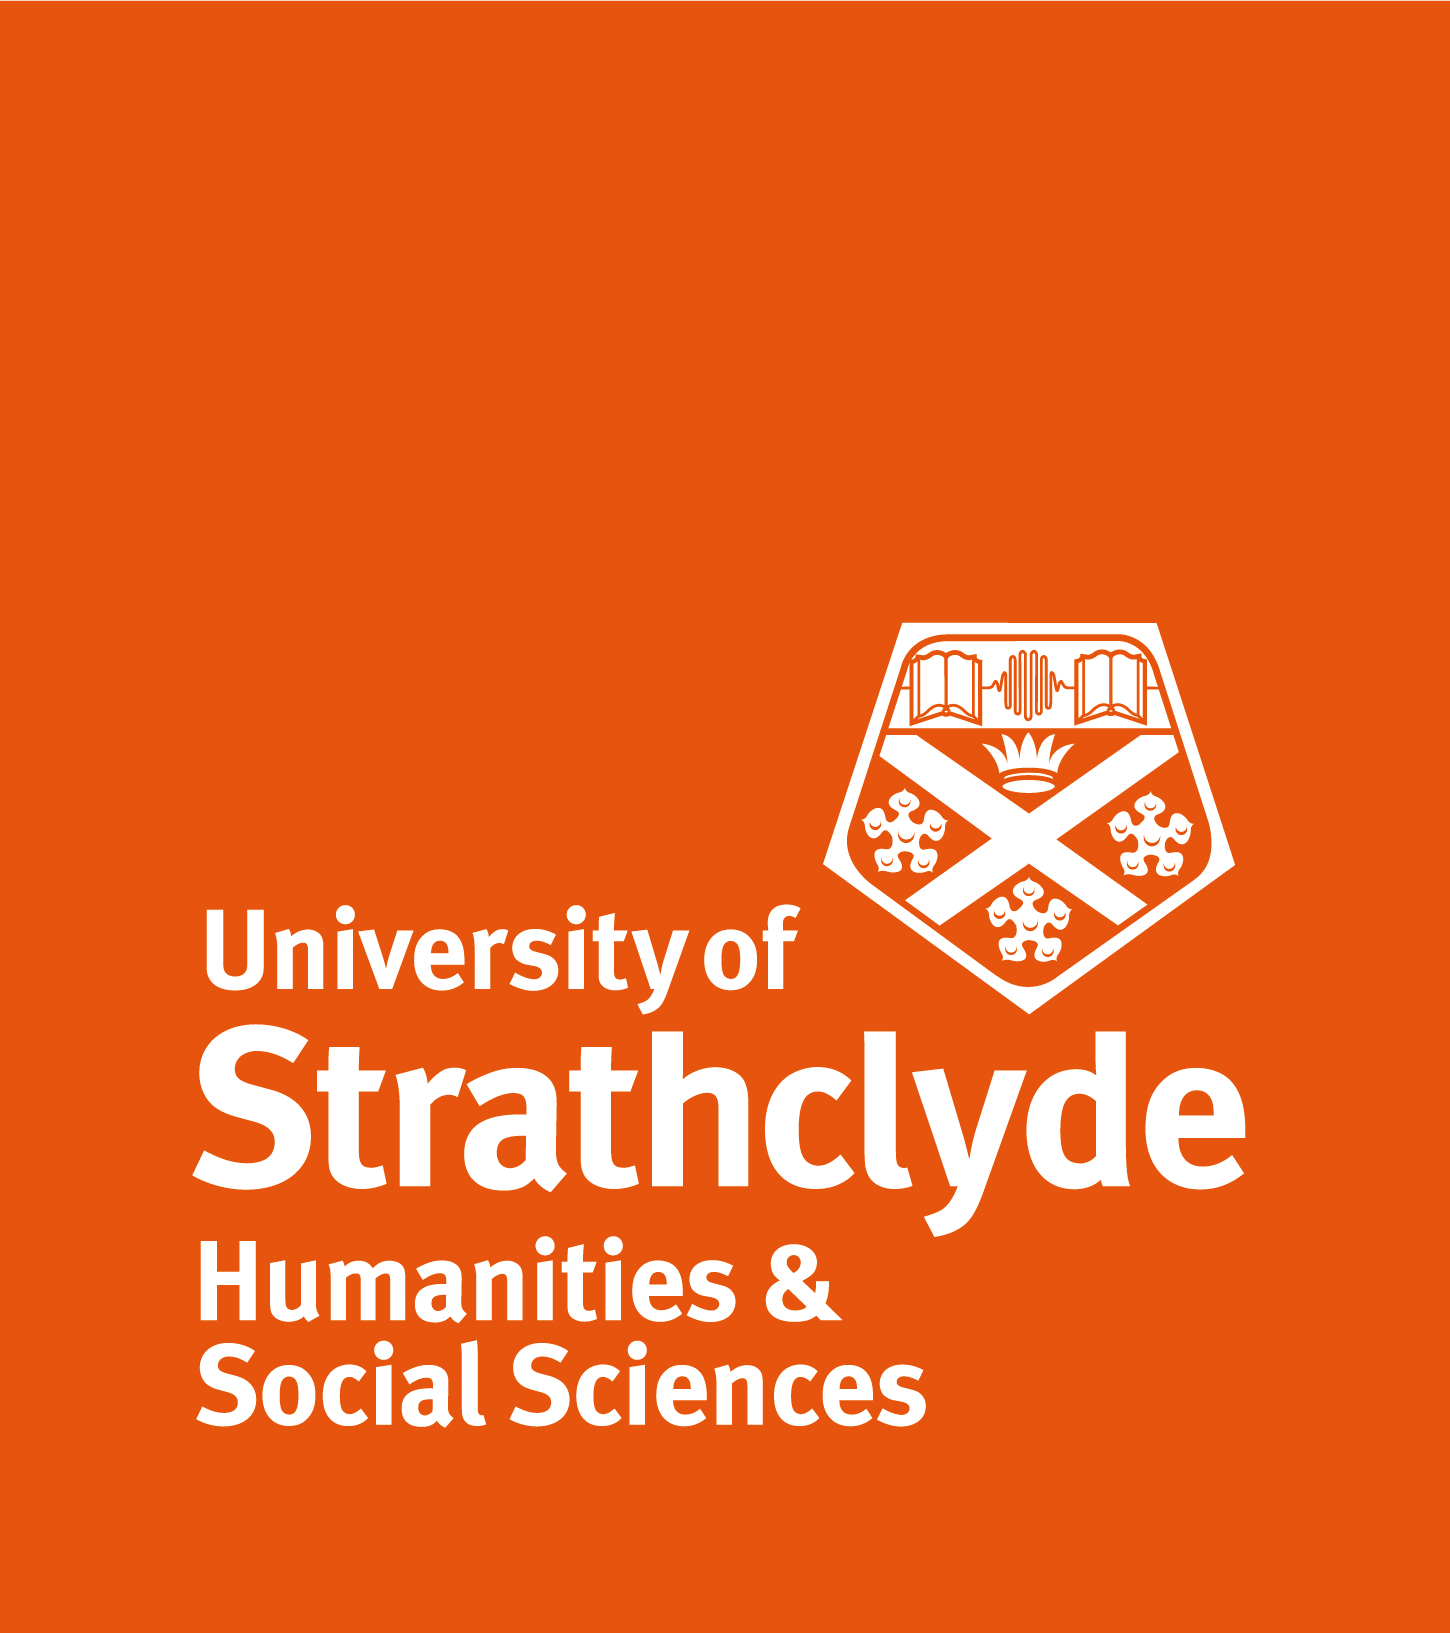 Orange background with white university logo and University of Strathclyde HASS in white text